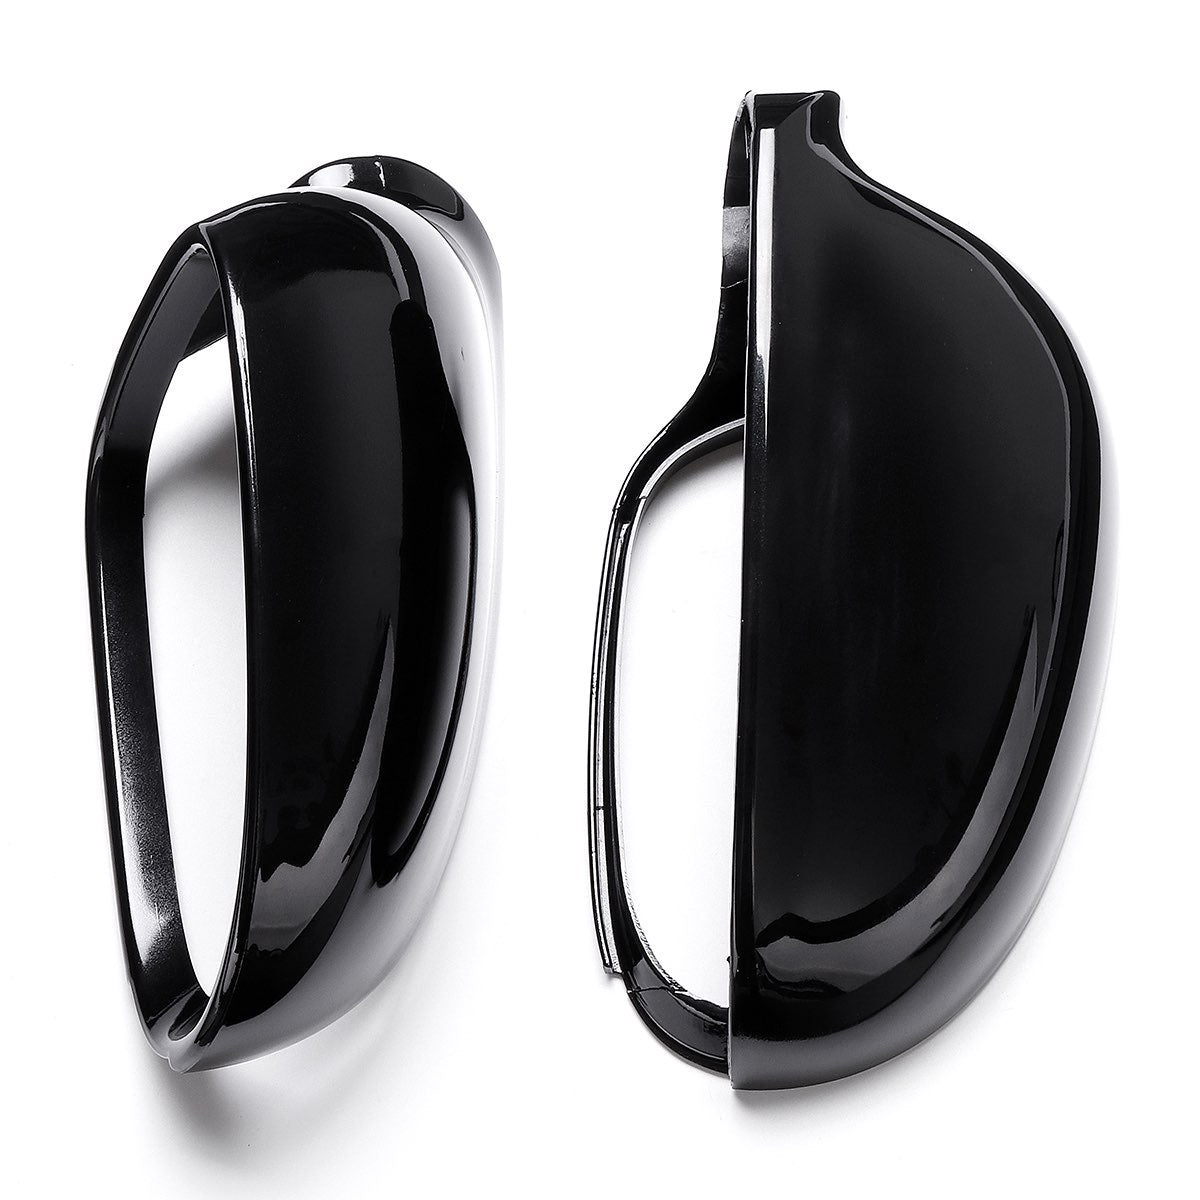 (RIGHT) Black Rearview Wing Mirror Cover Casing suit For Volkswagen For VW Jetta Golf MK5